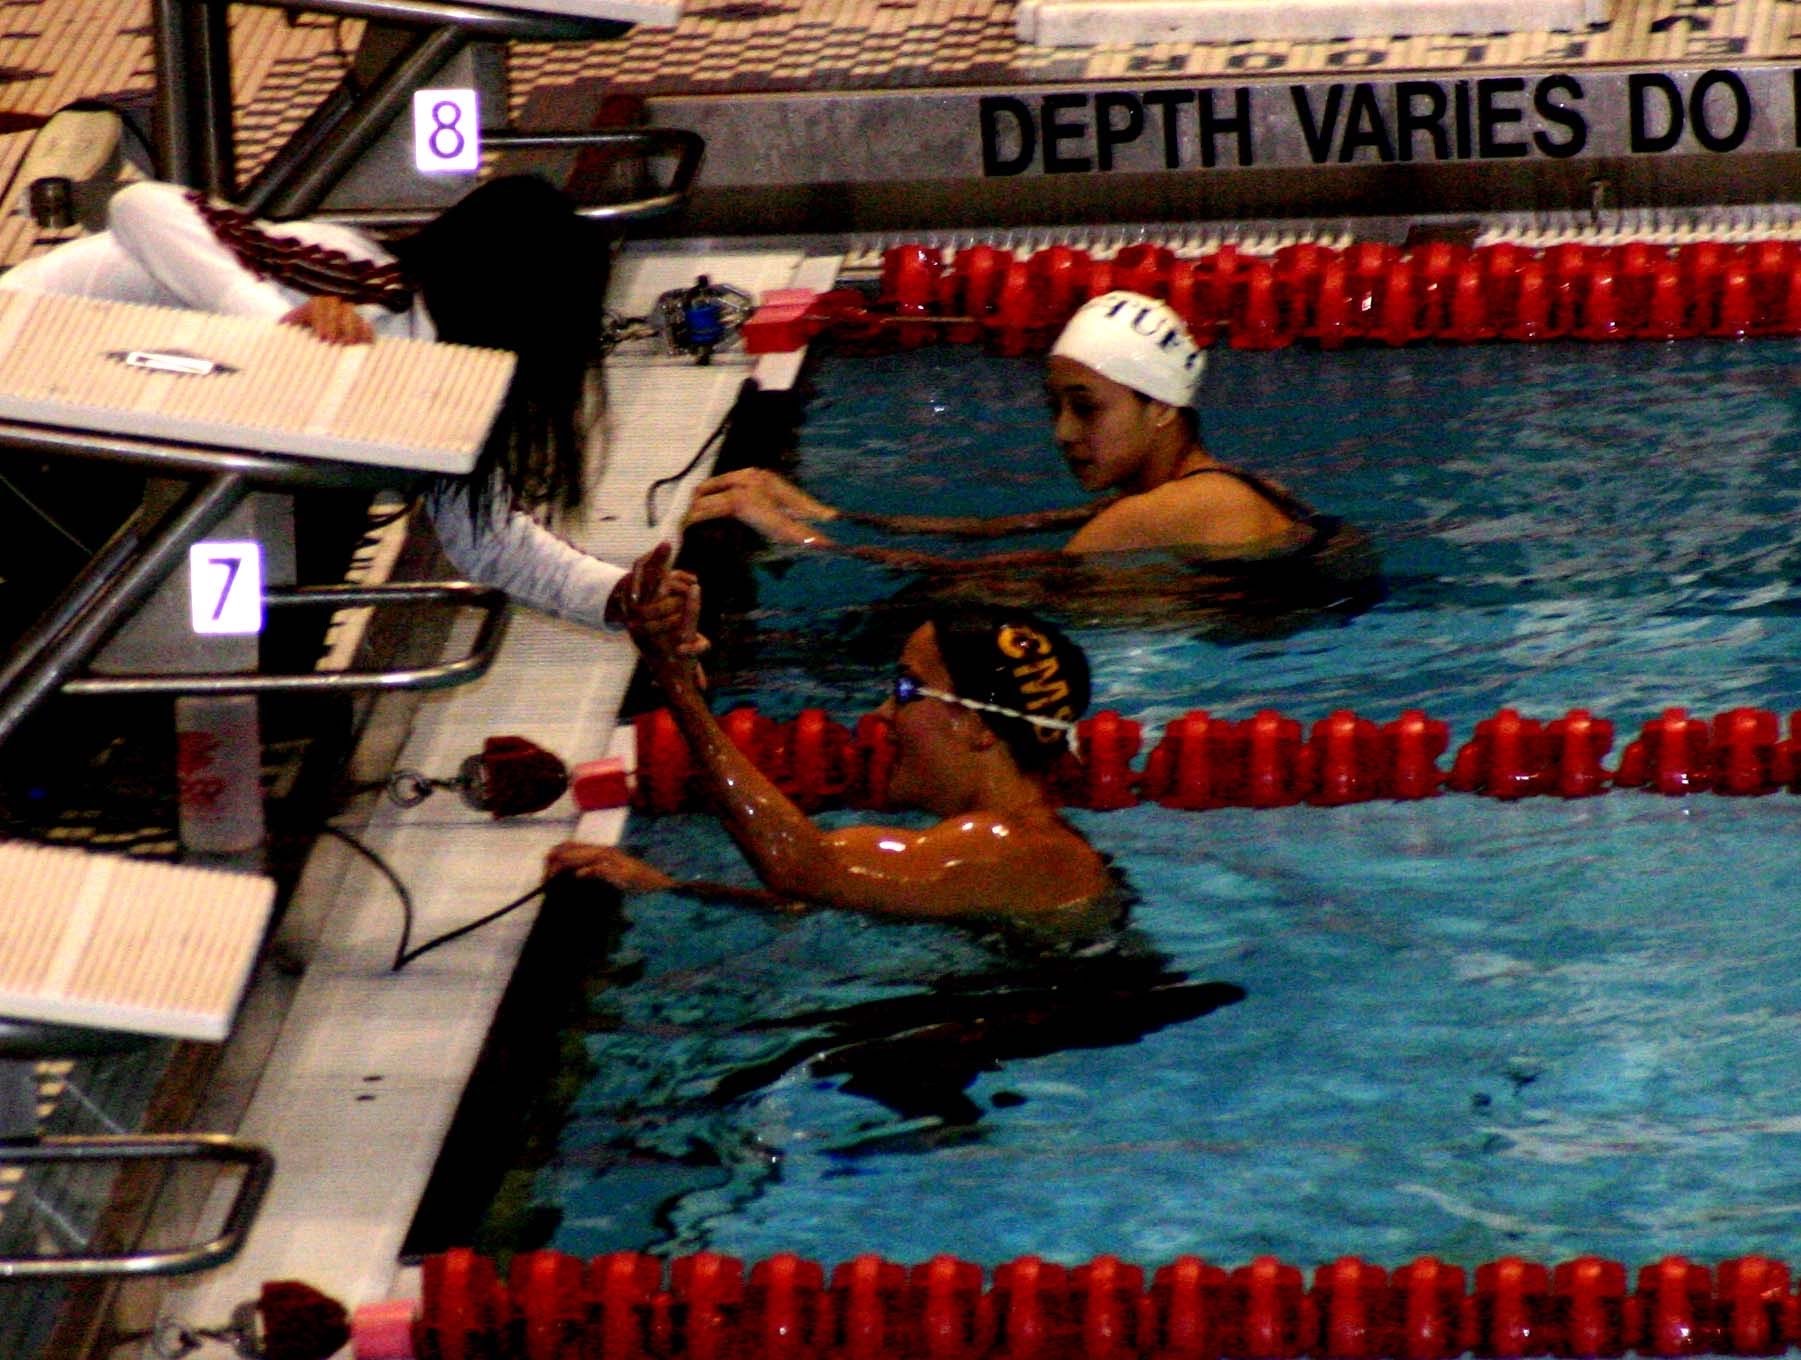 Lisal Smith high-fiving Linh Luong after winning the 400 IM